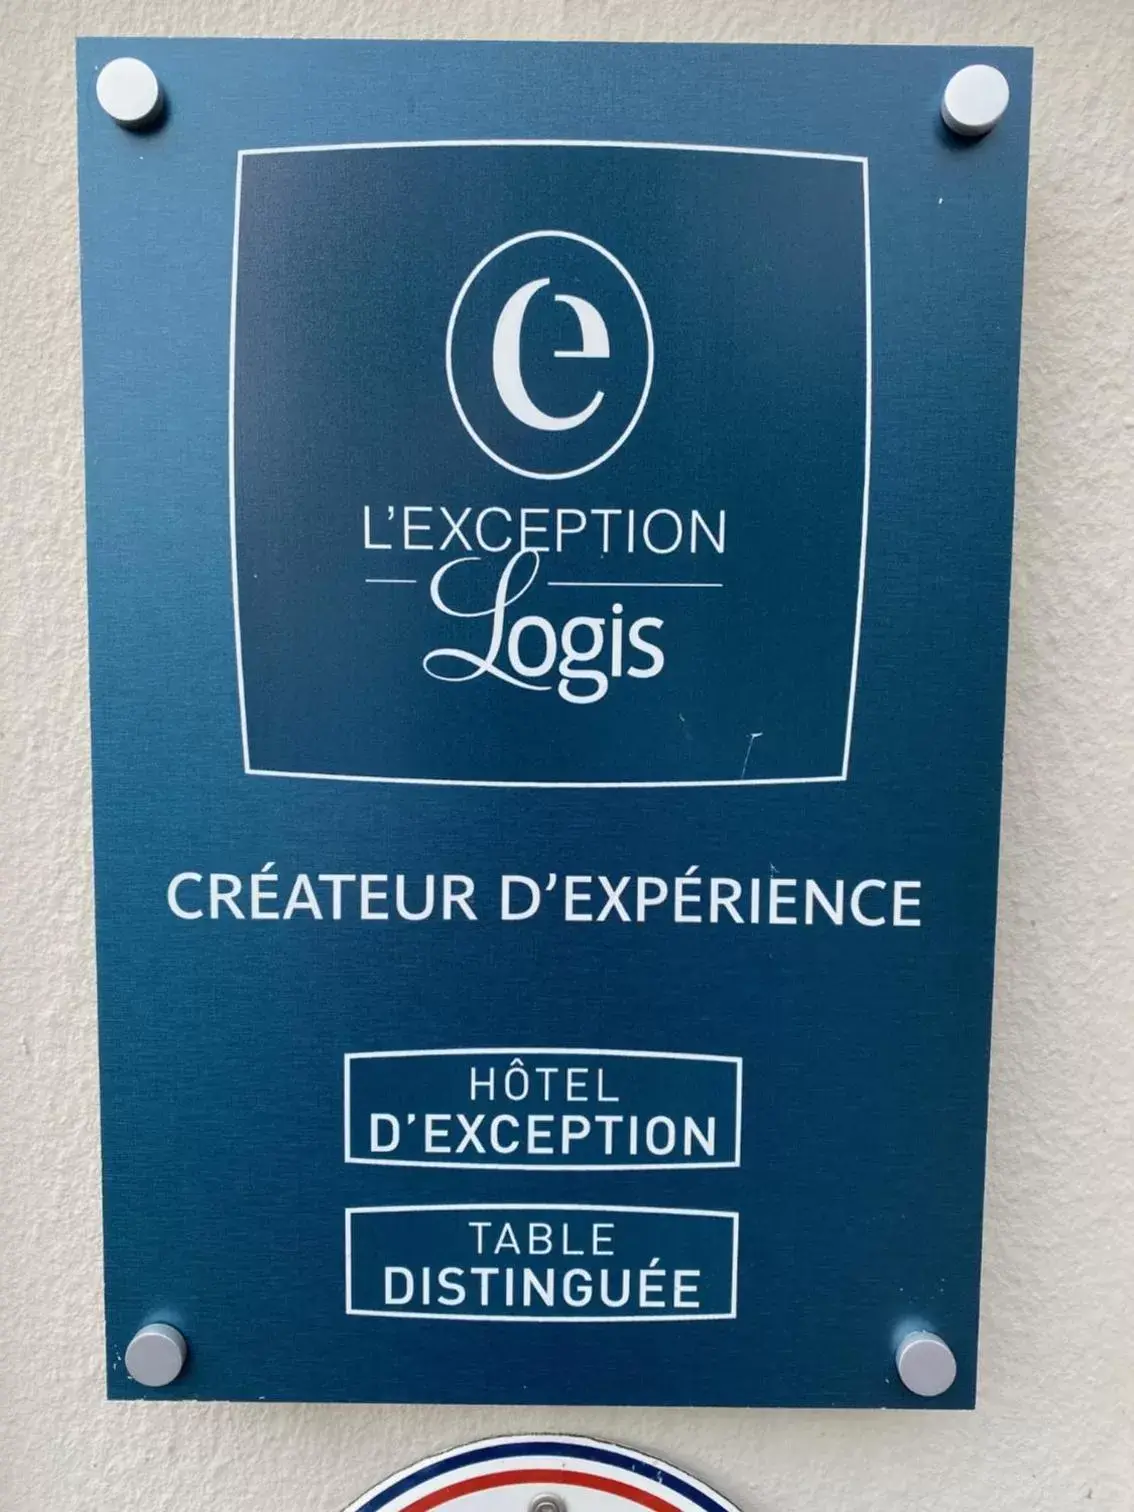 Logo/Certificate/Sign in Les 3 Lieux